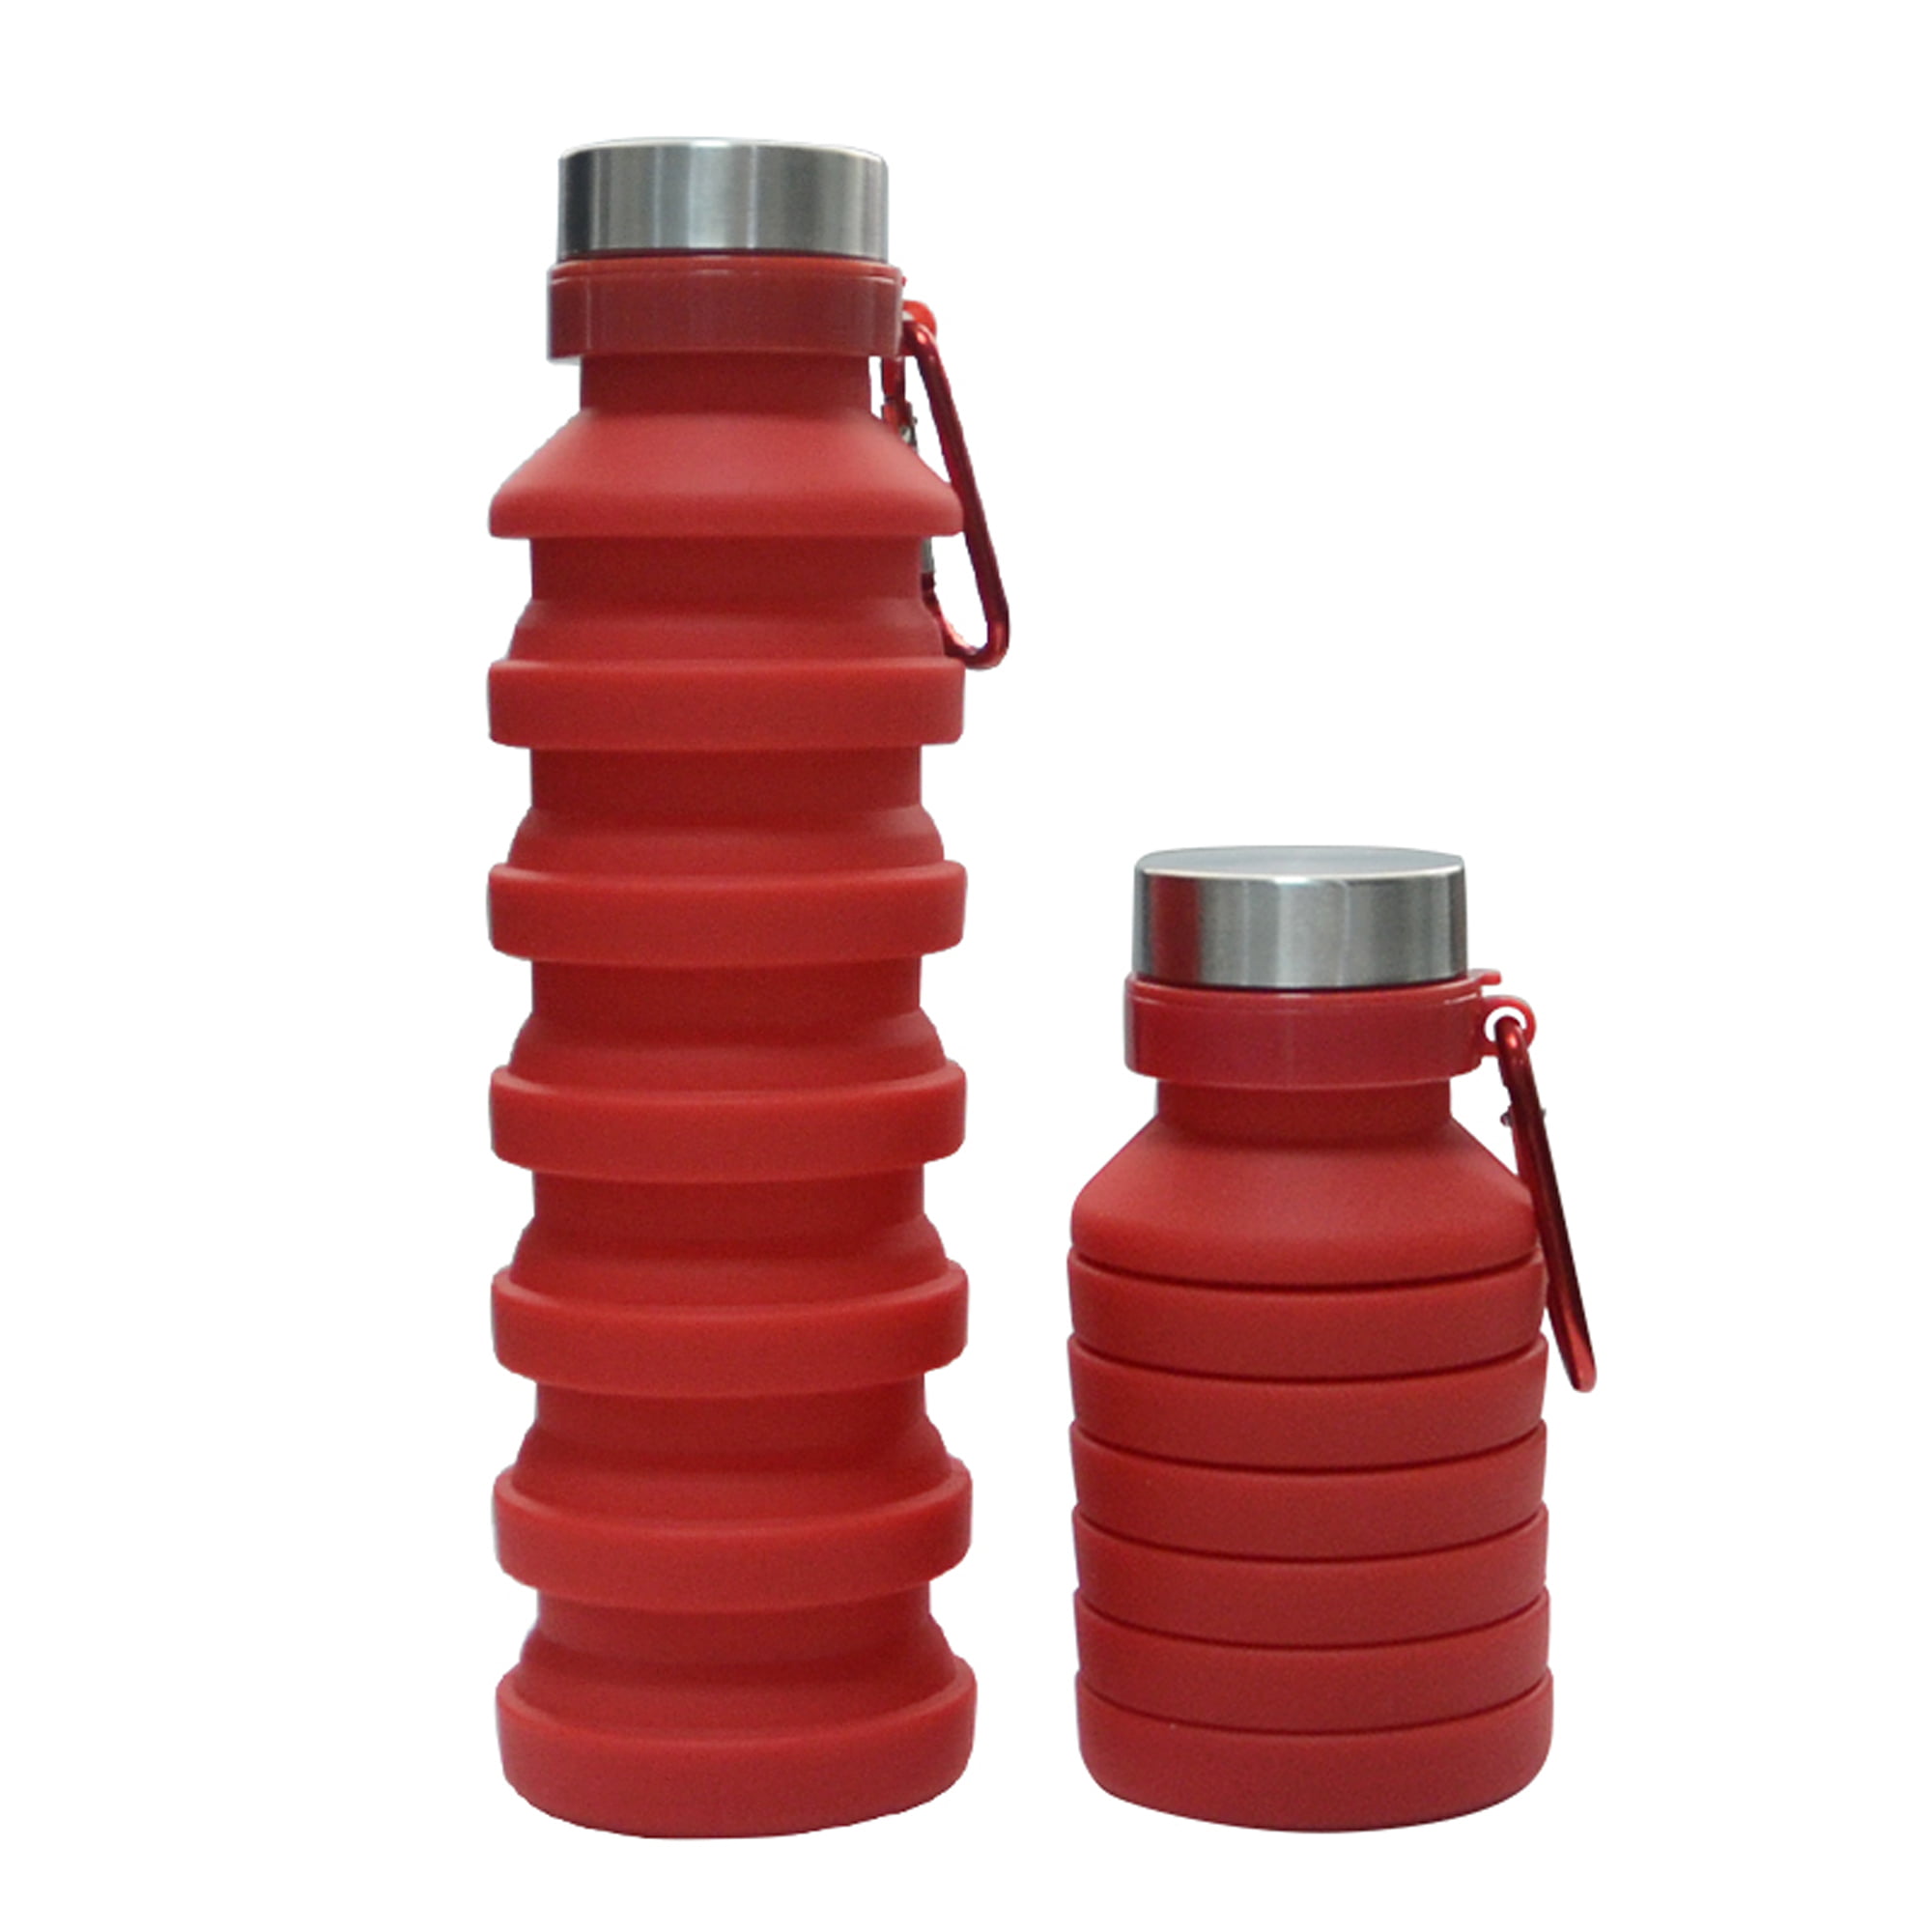 4X Portable Foldable Collapsible Water Bottle For Outdoor Travel Camping Hiking